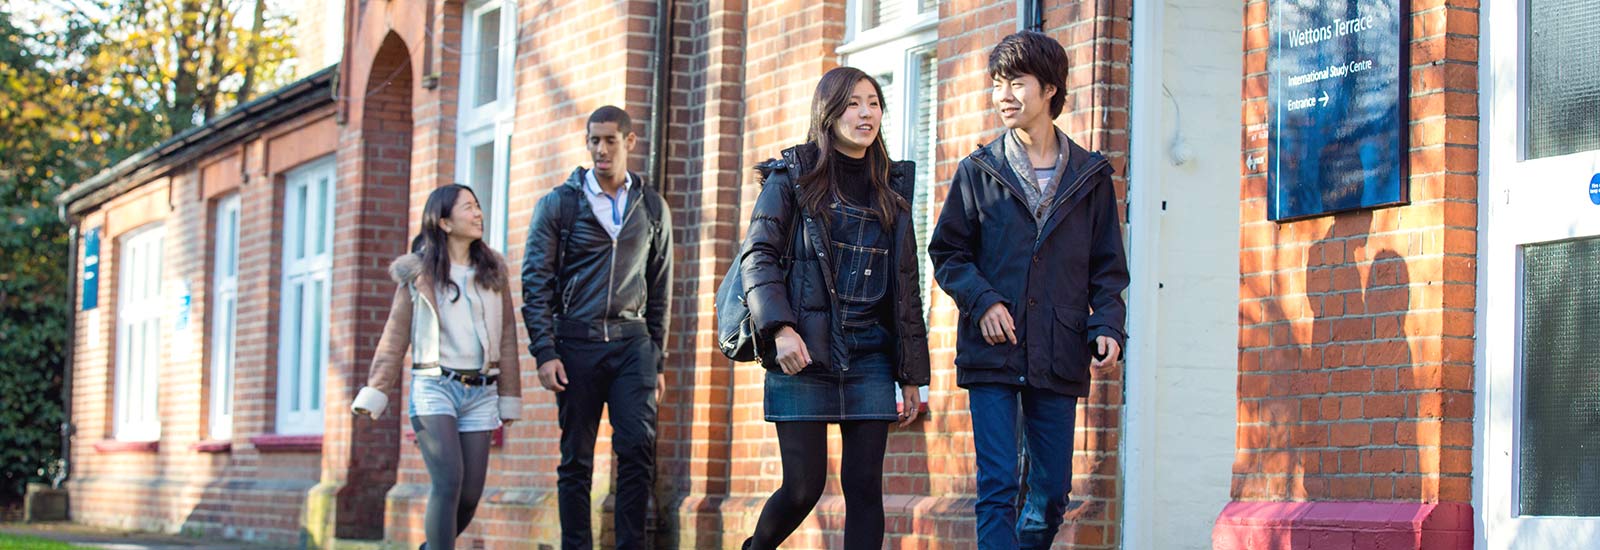 A group of students walking past a campus building